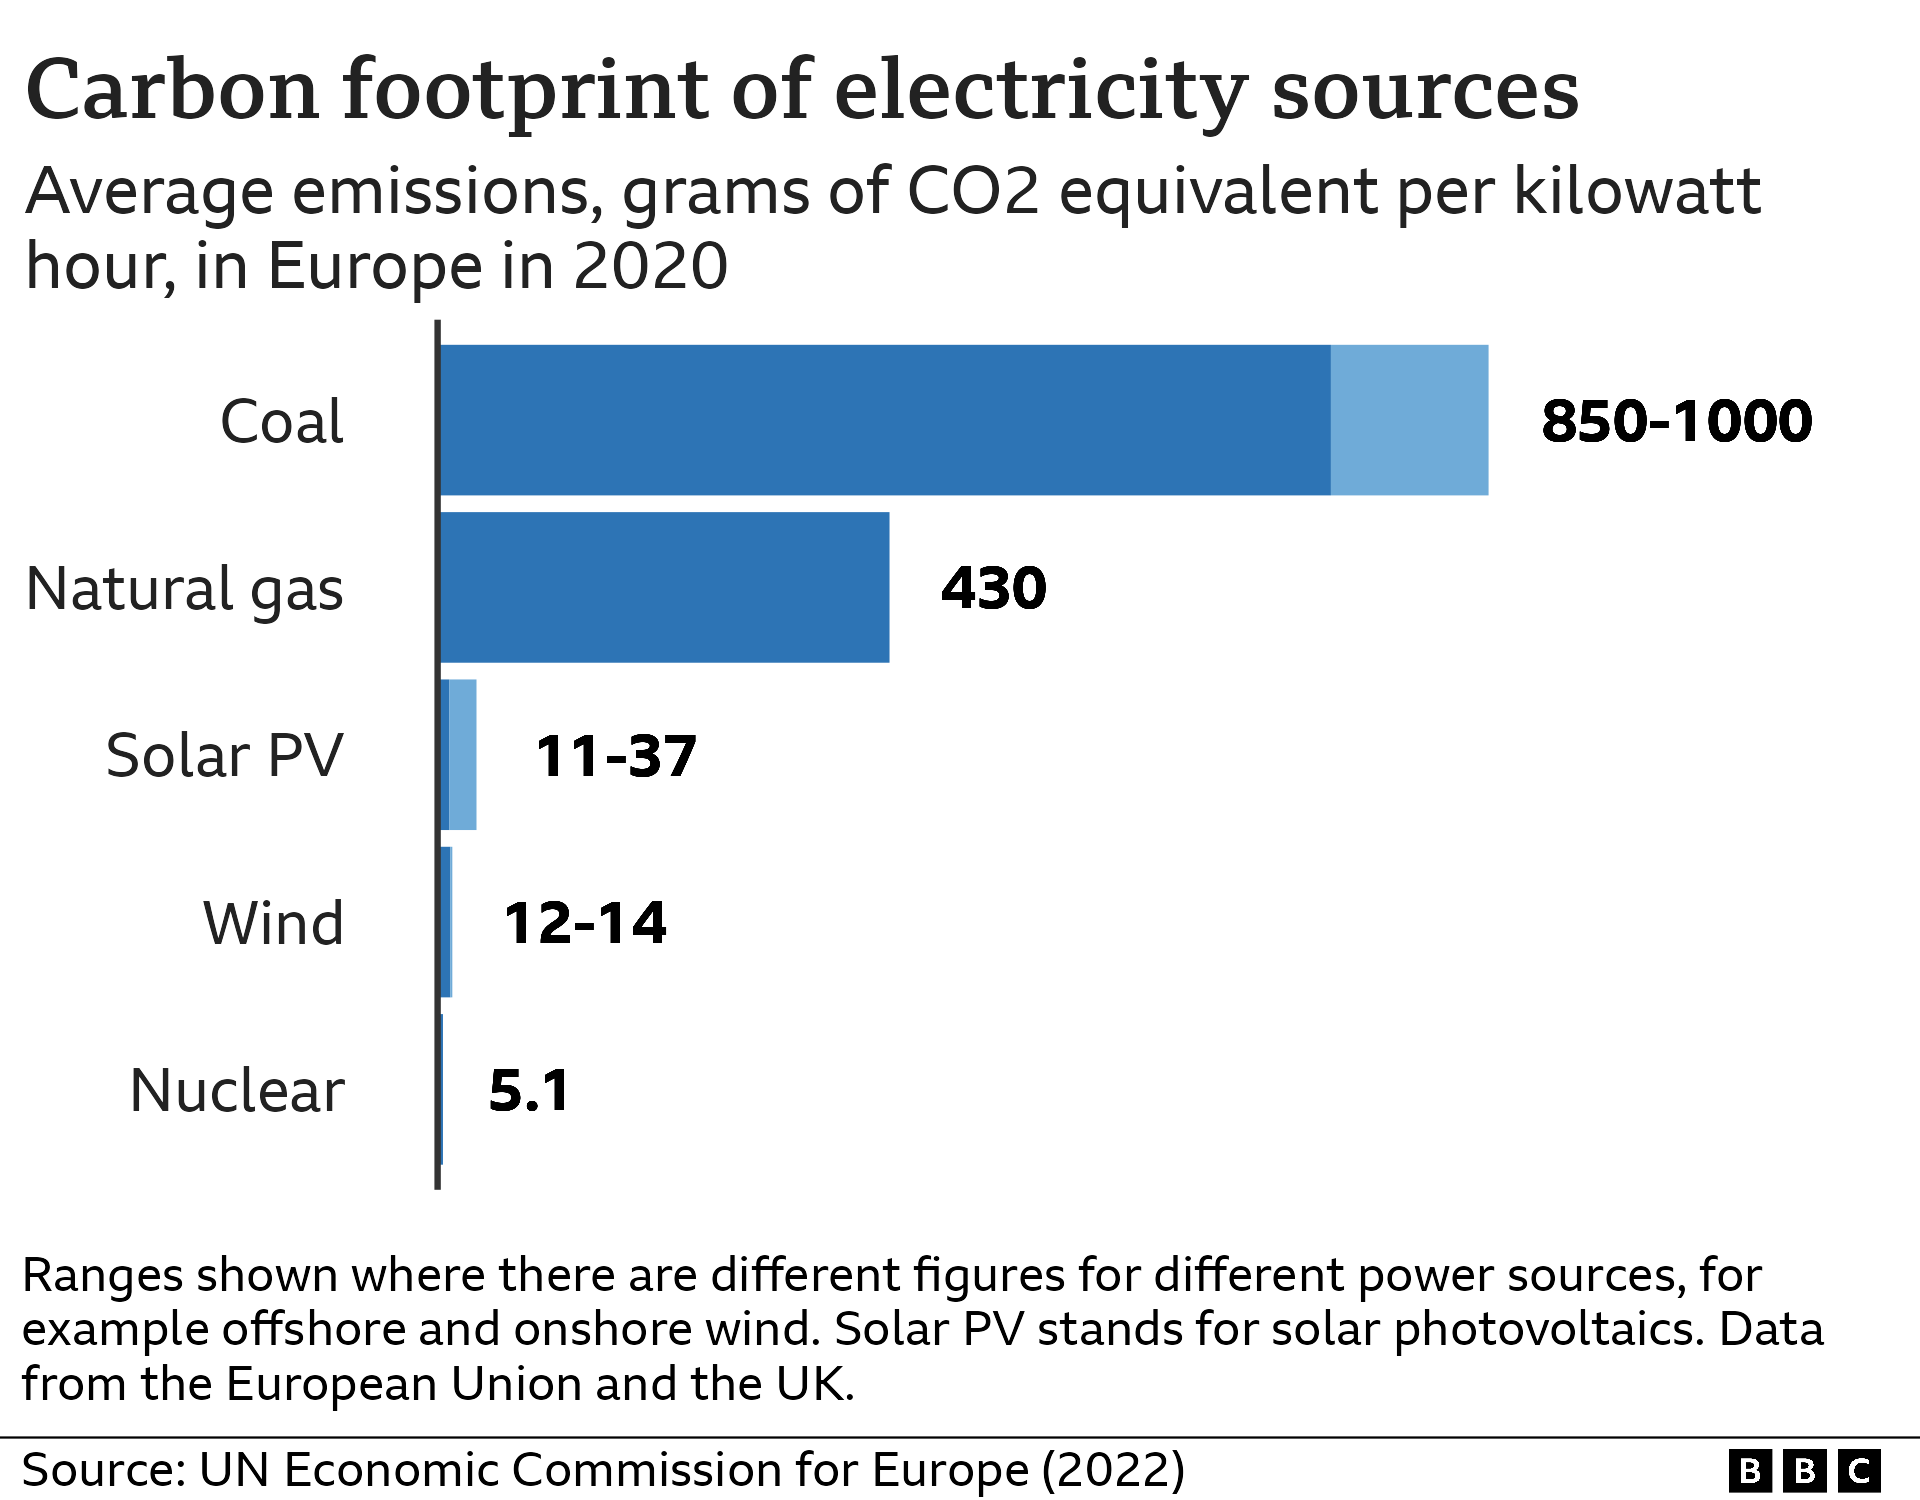 Average emissions intensity of different electricity sources in Europe in 2020. Coal shows 850 to 1000 grams of carbon dioxide equivalent per kilowatt hour. The rest shown are natural gas (430), solar PV (11 to 37), wind (12 to 14), and nuclear (5.1).